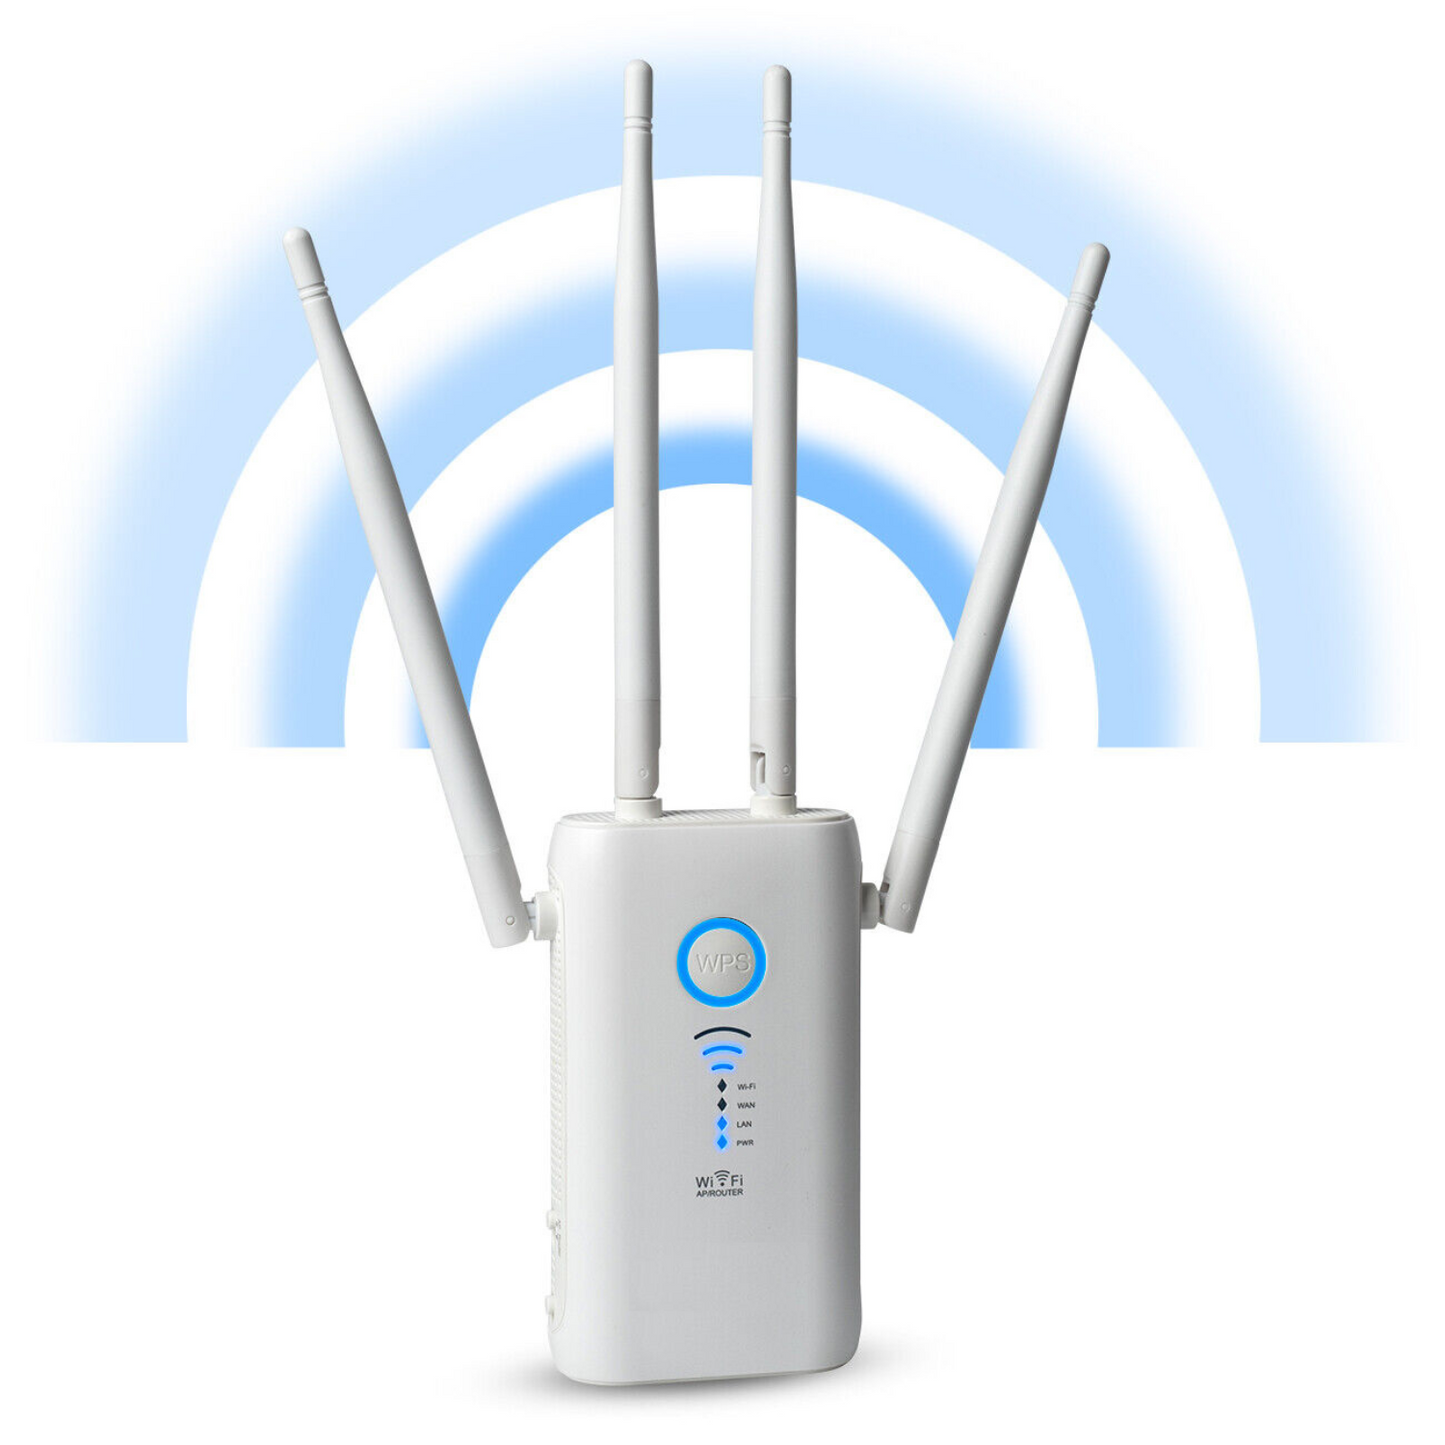 Wireless Plug In Wifi Internet Repeater Signal Range Booster Extender